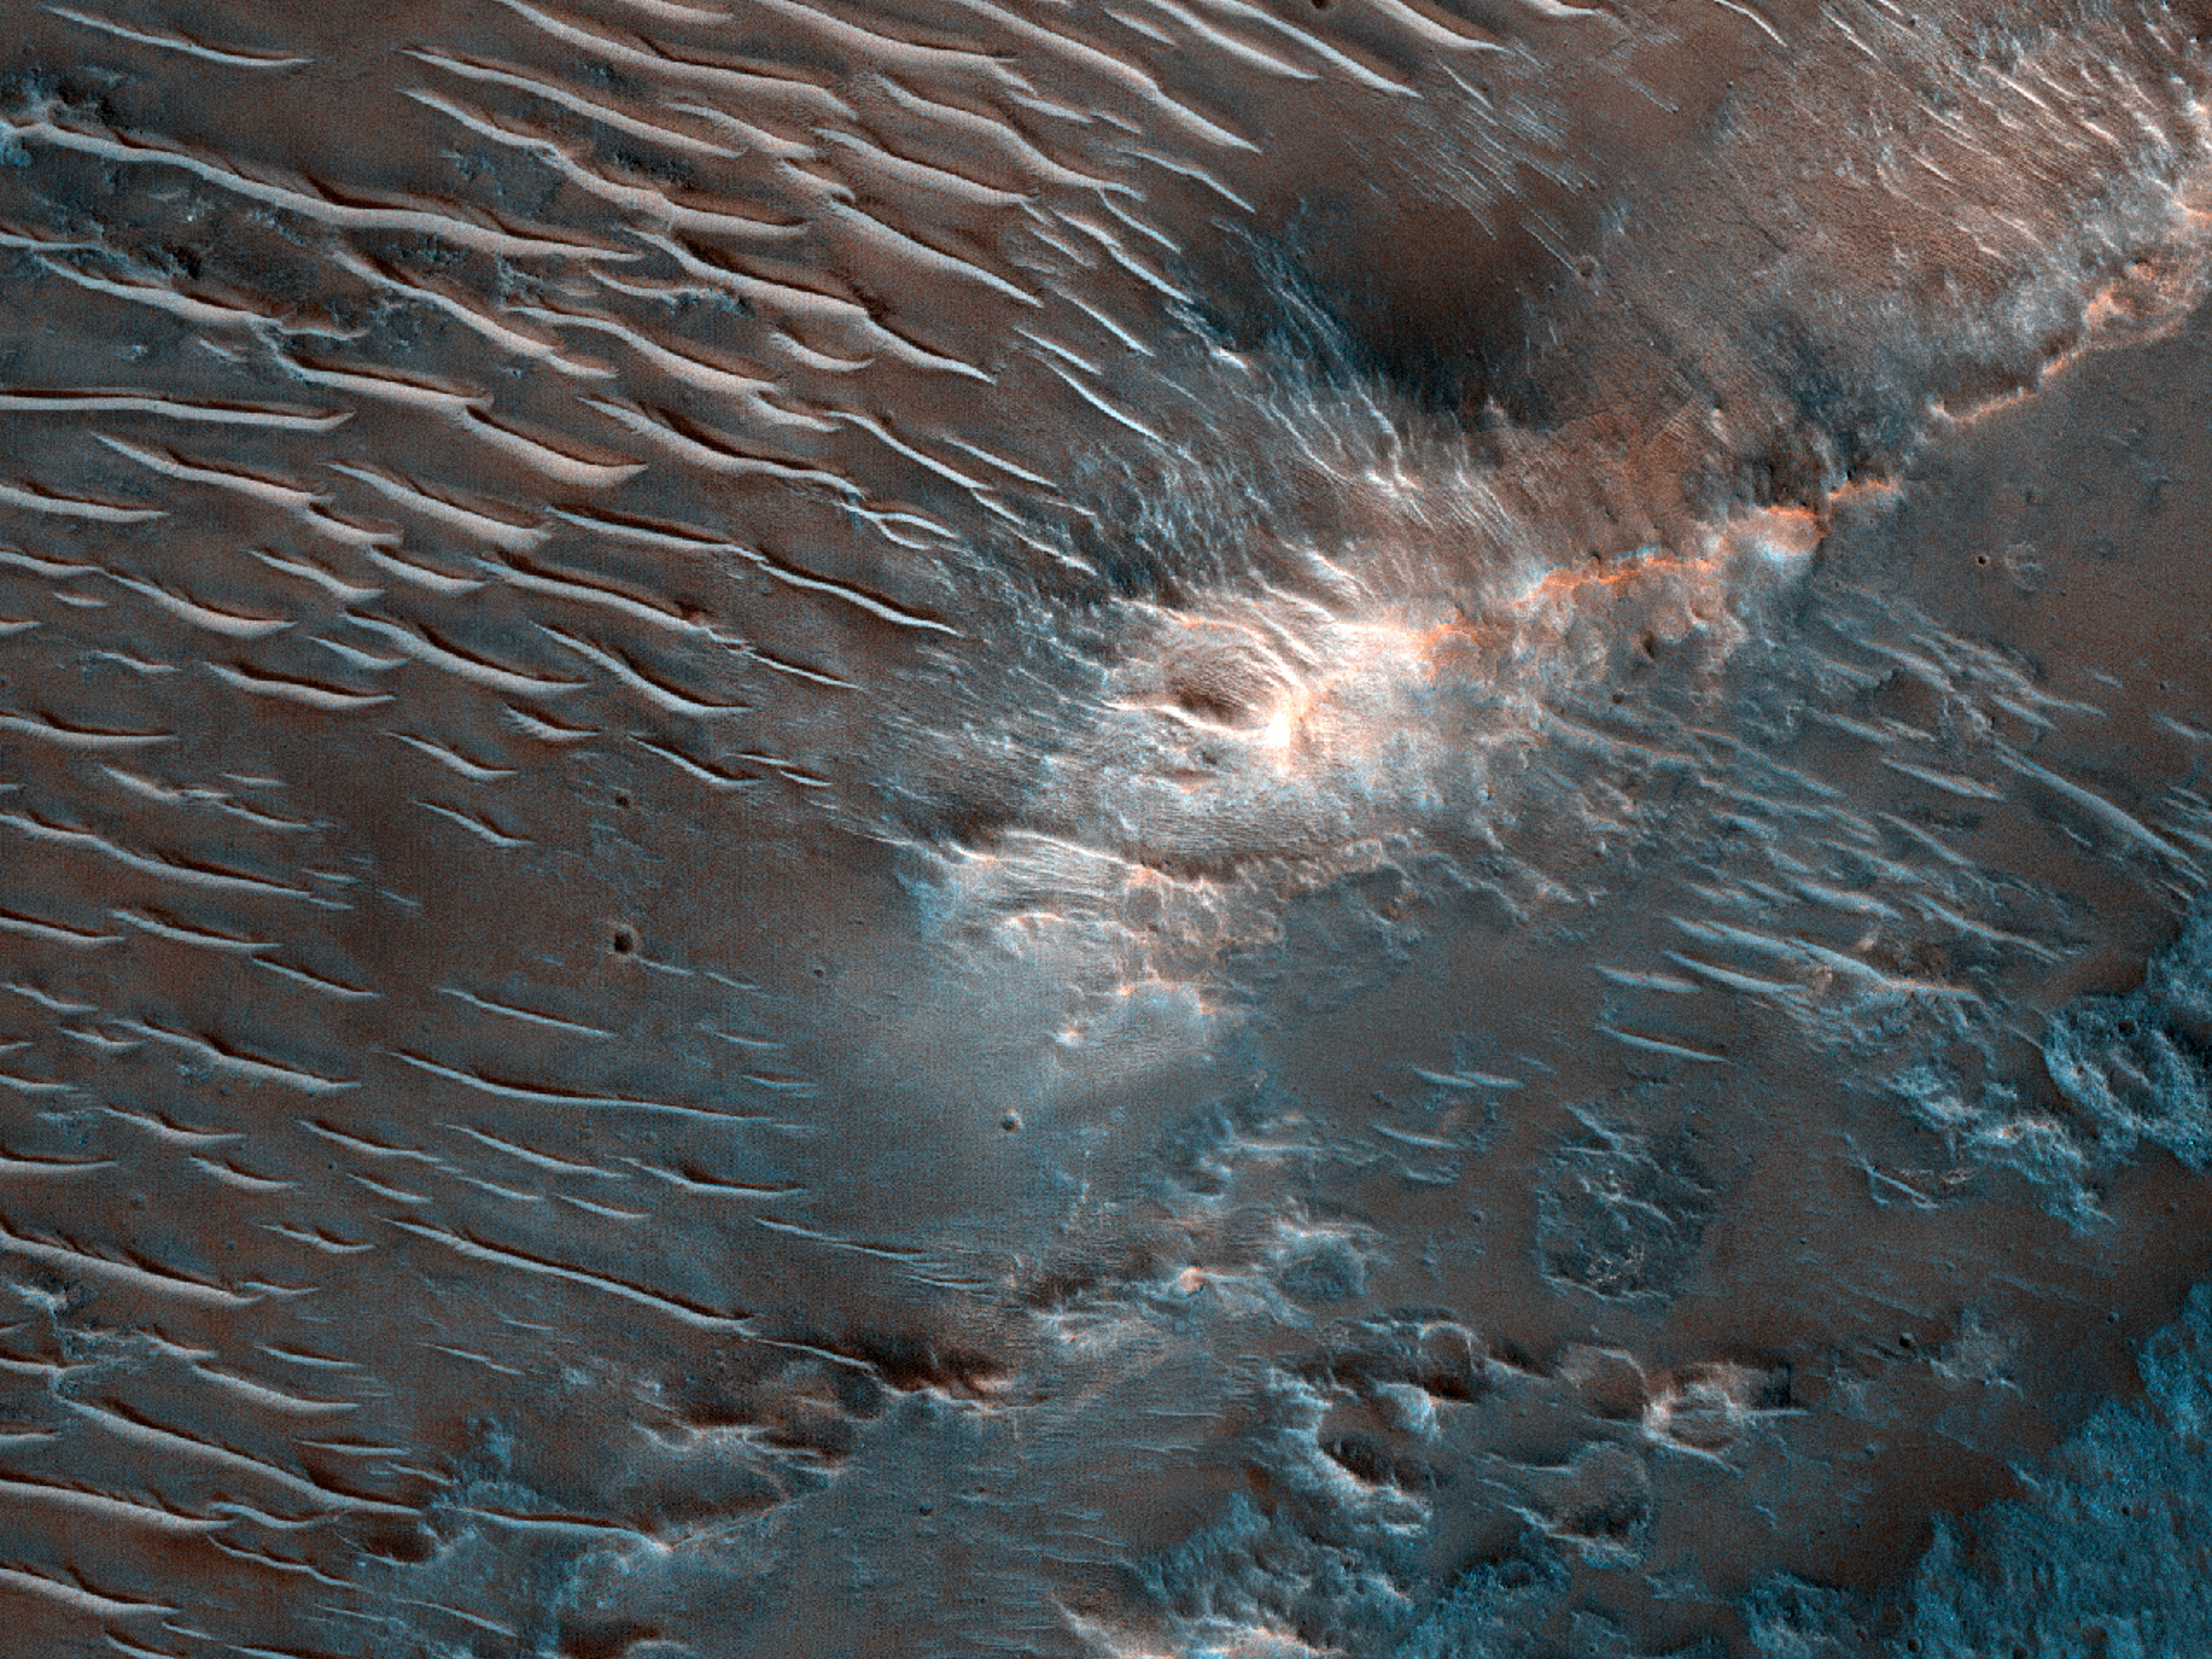 A Knobby Unit in a Degraded Crater